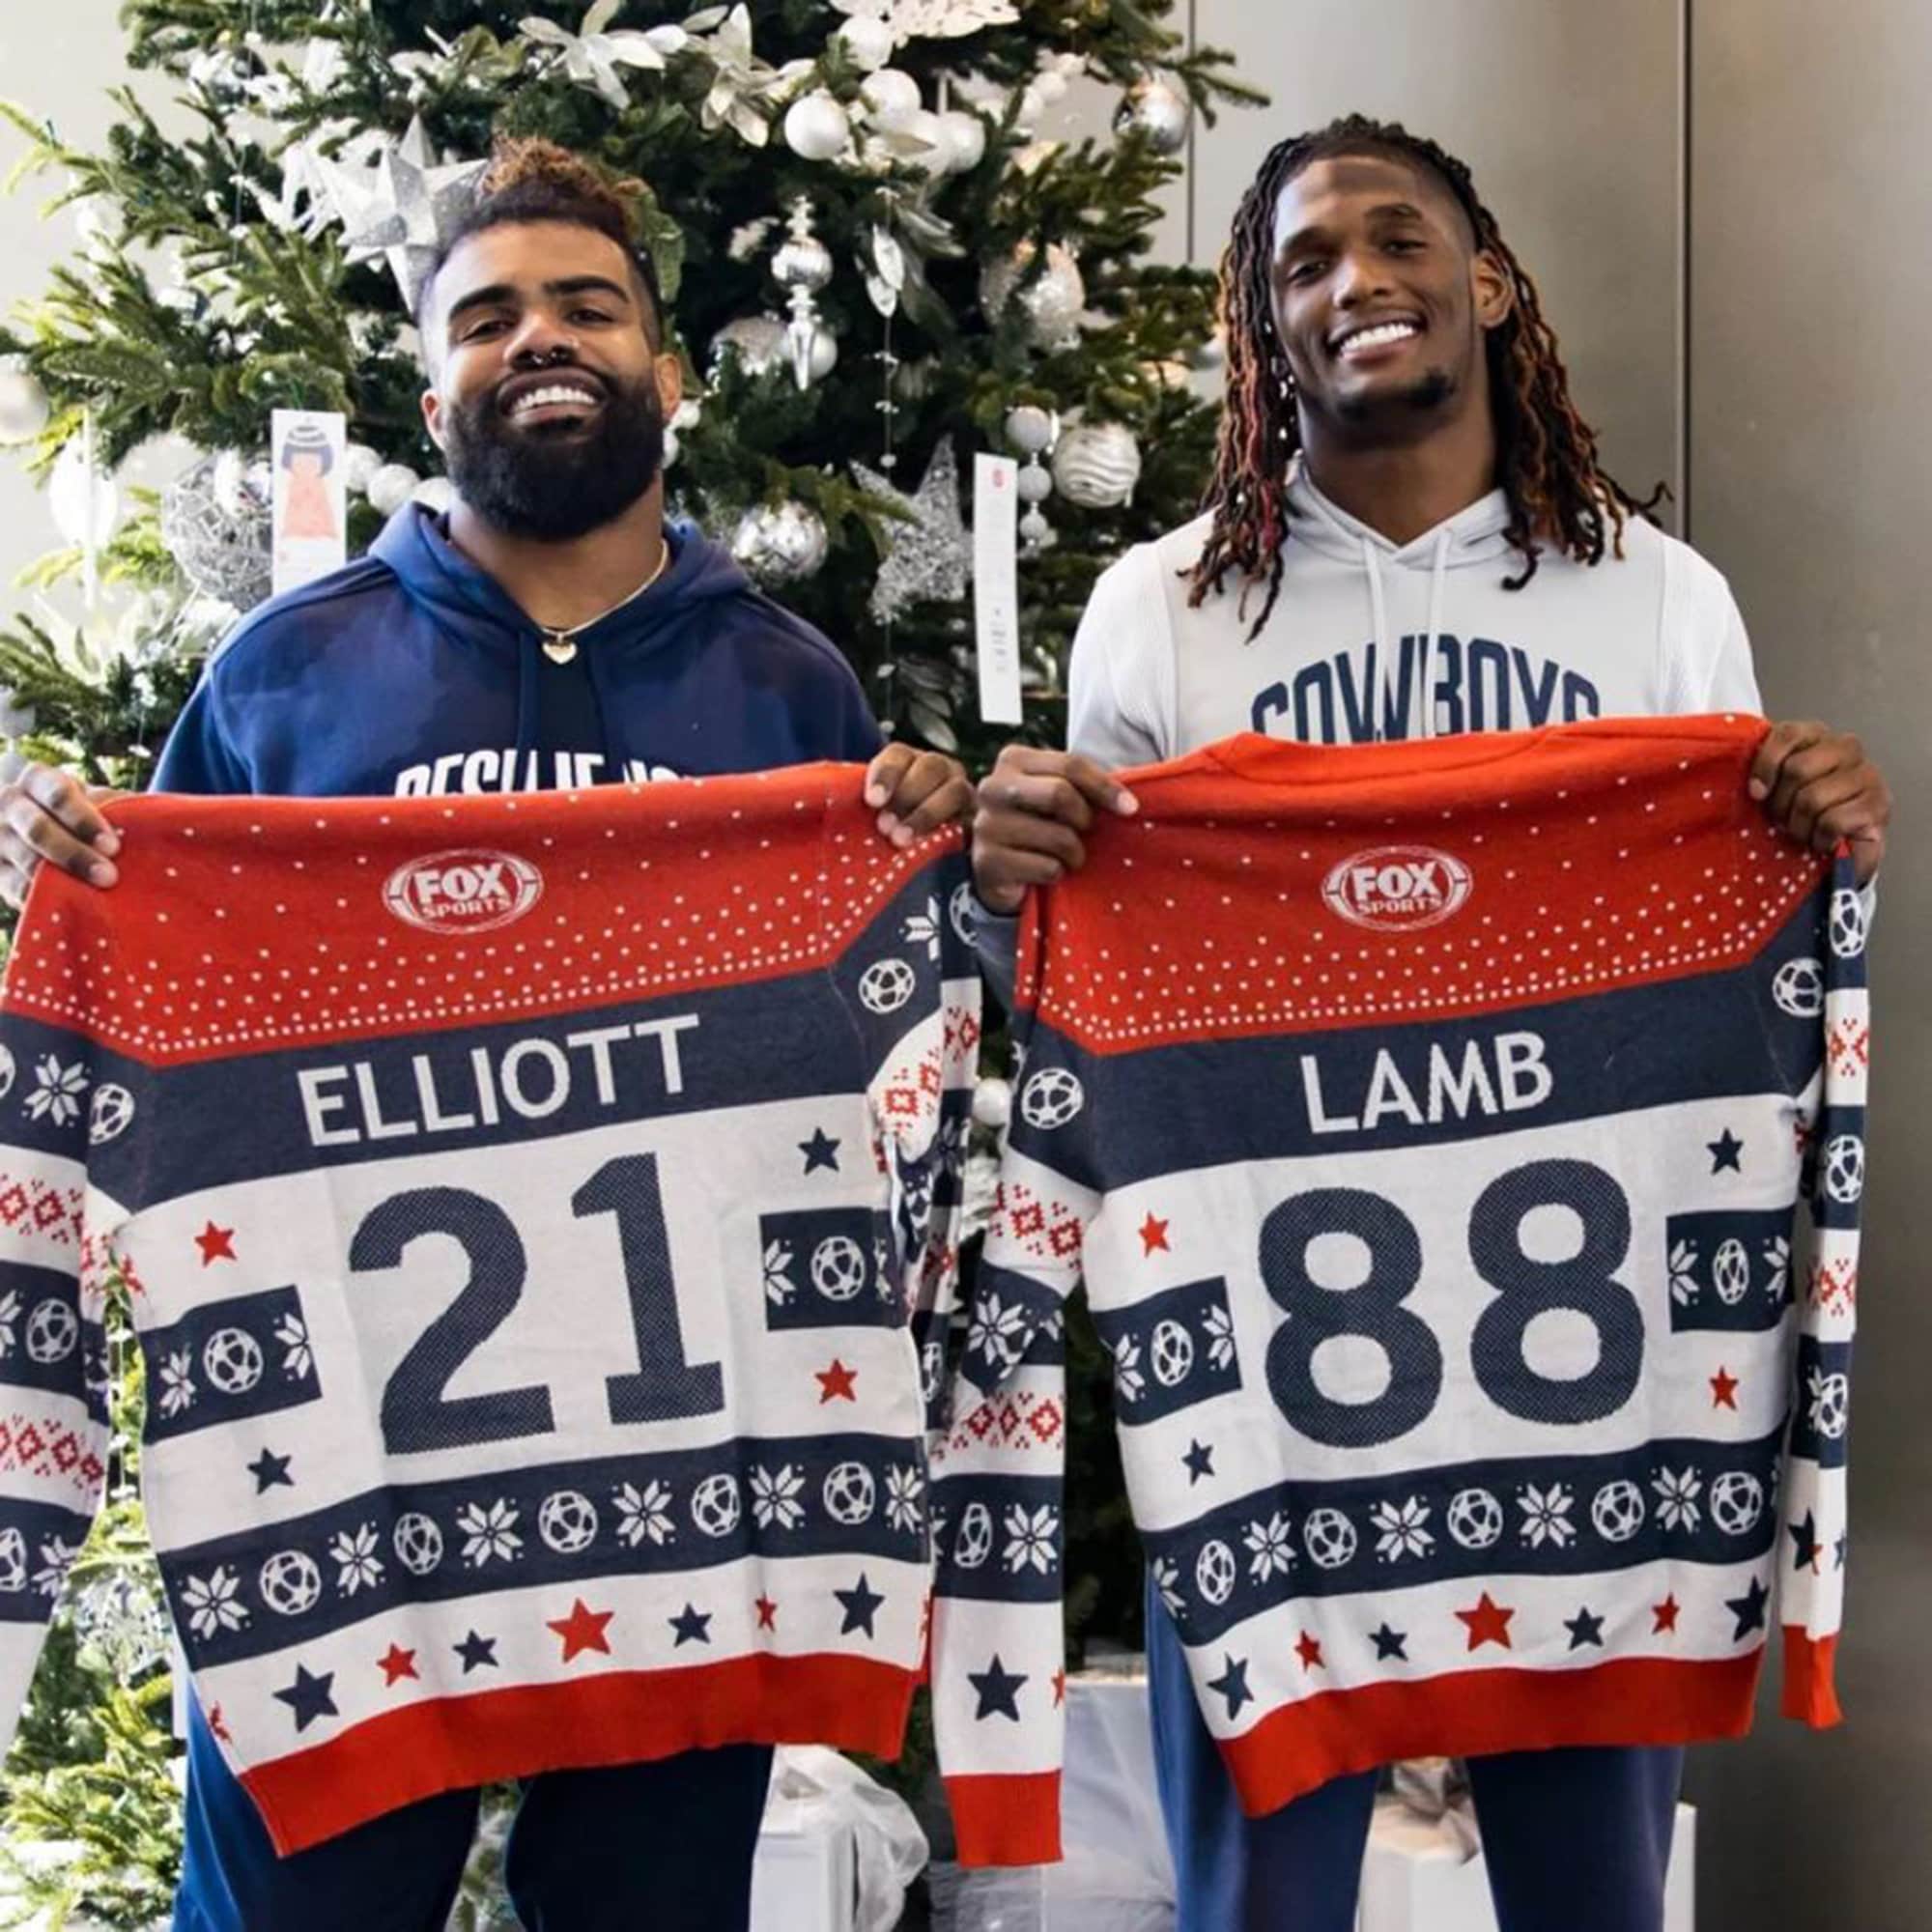 USA World Cup Ugly Christmas Sweater Manufacturer